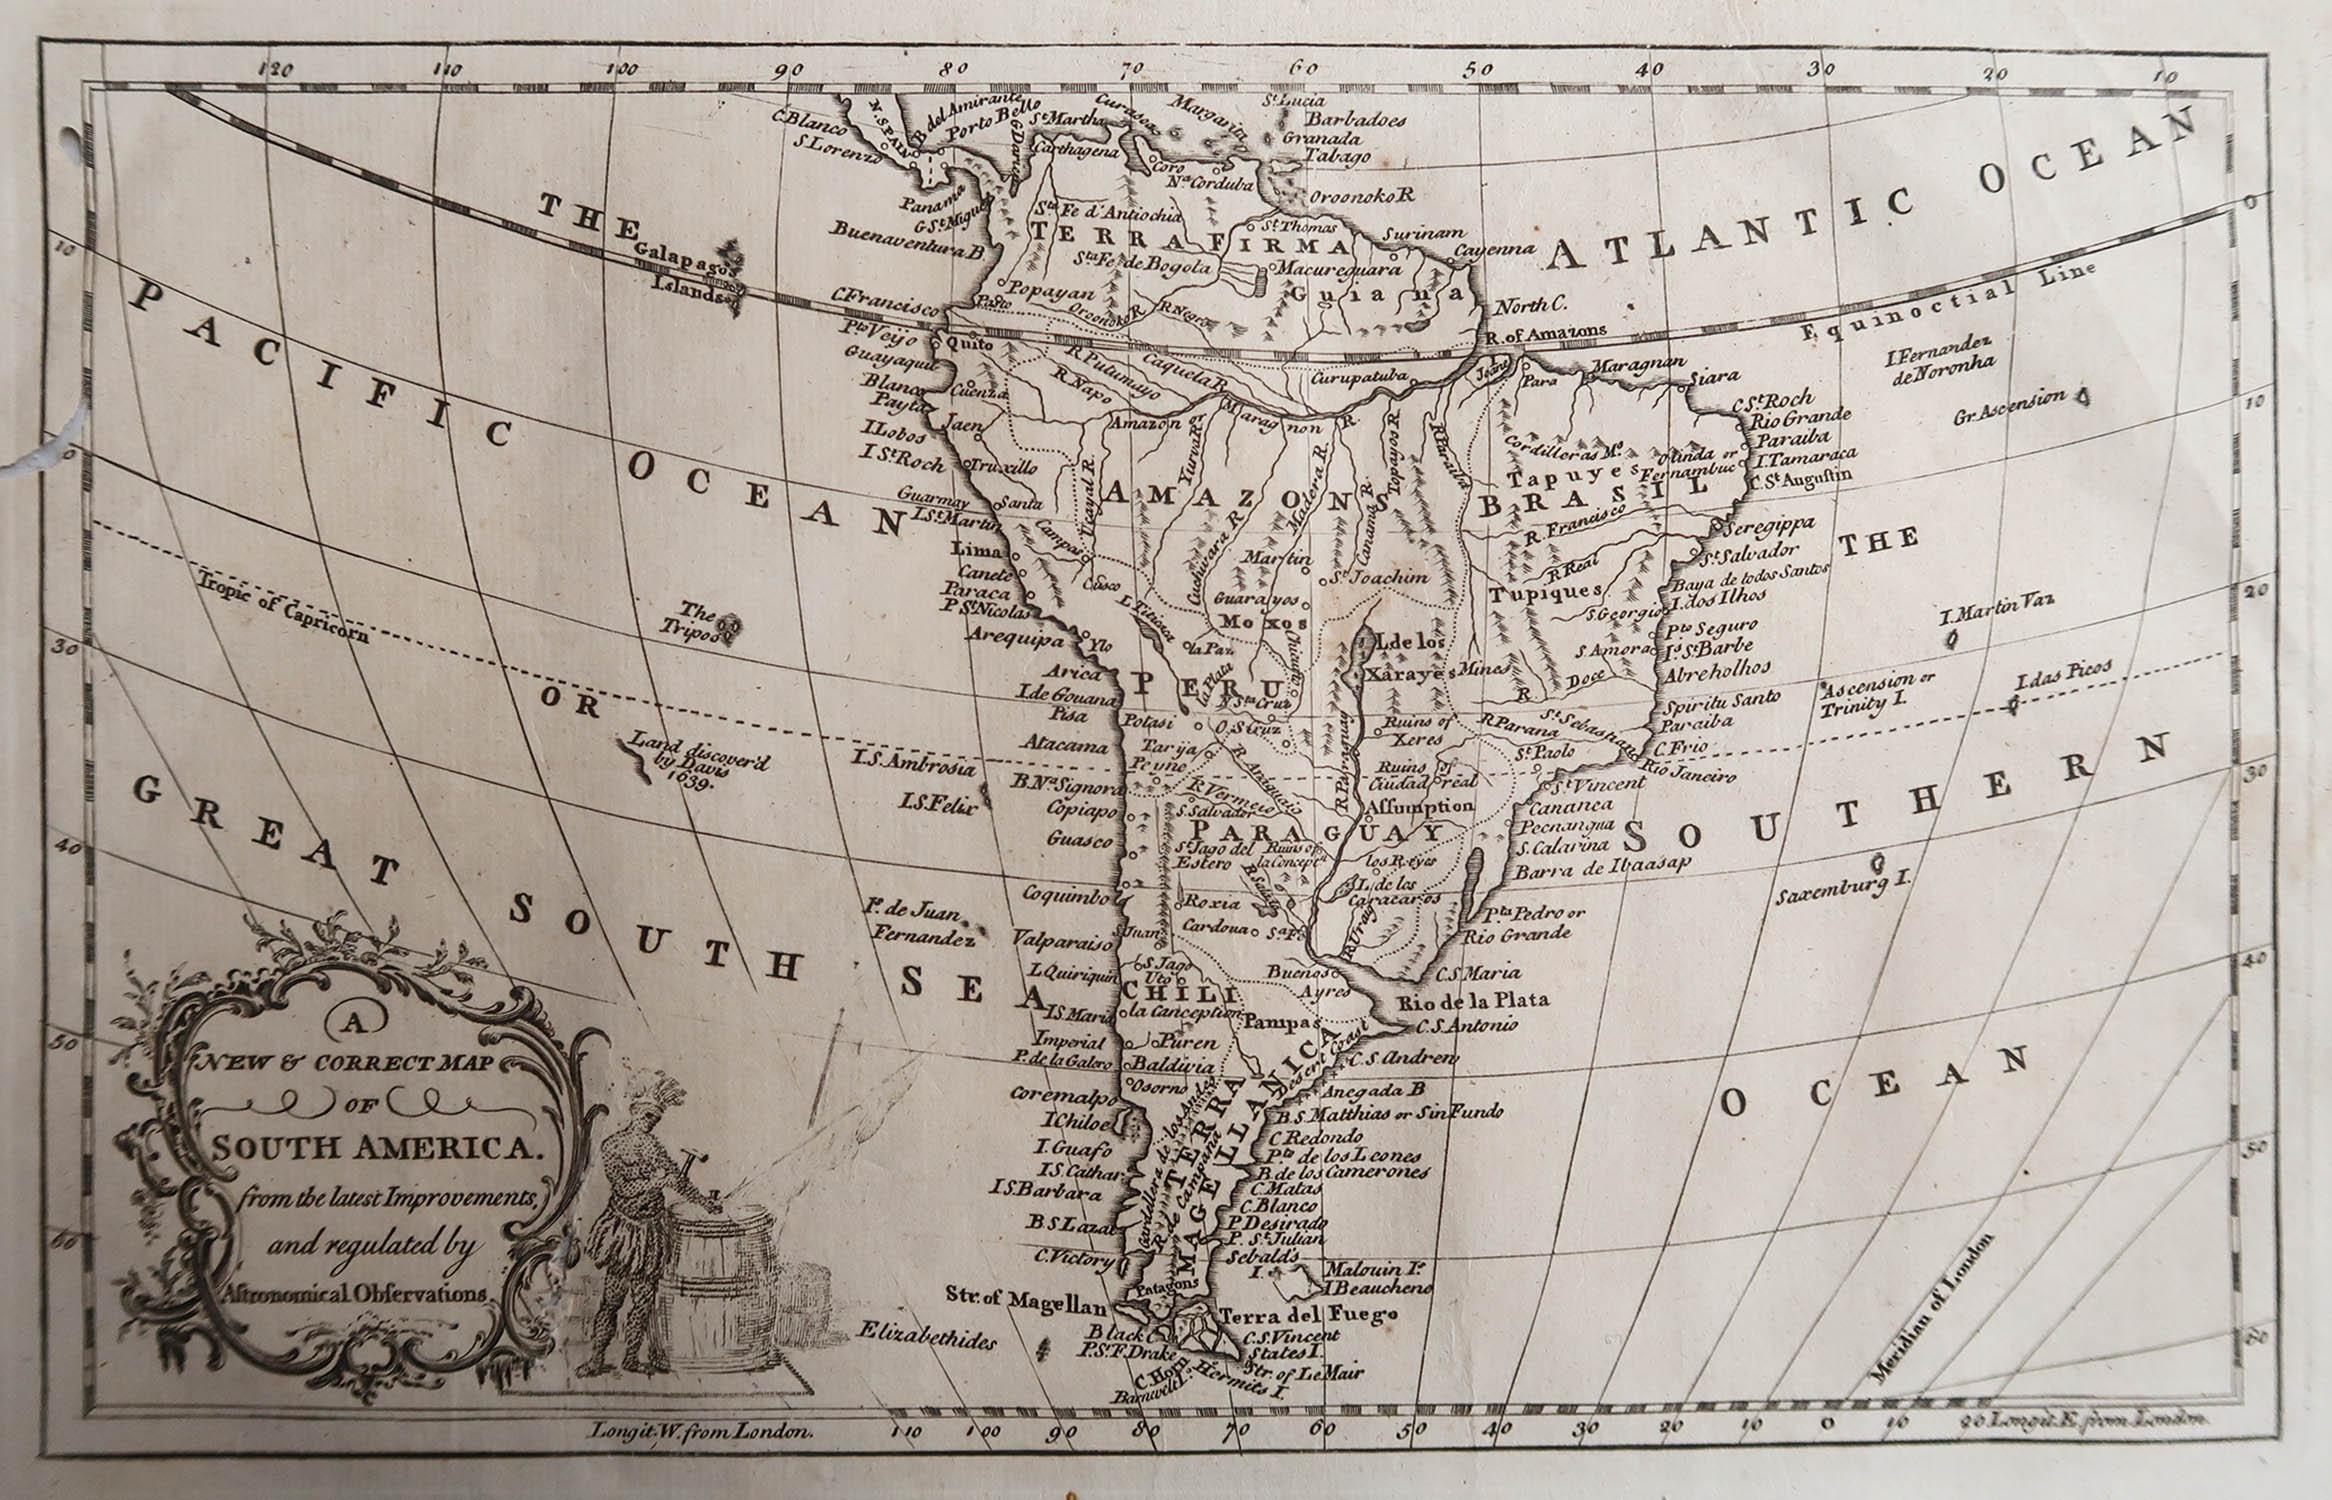 Great map of South America

Copper-plate engraving 

Published C.1780

Two small worm holes to left side of map

Unframed.